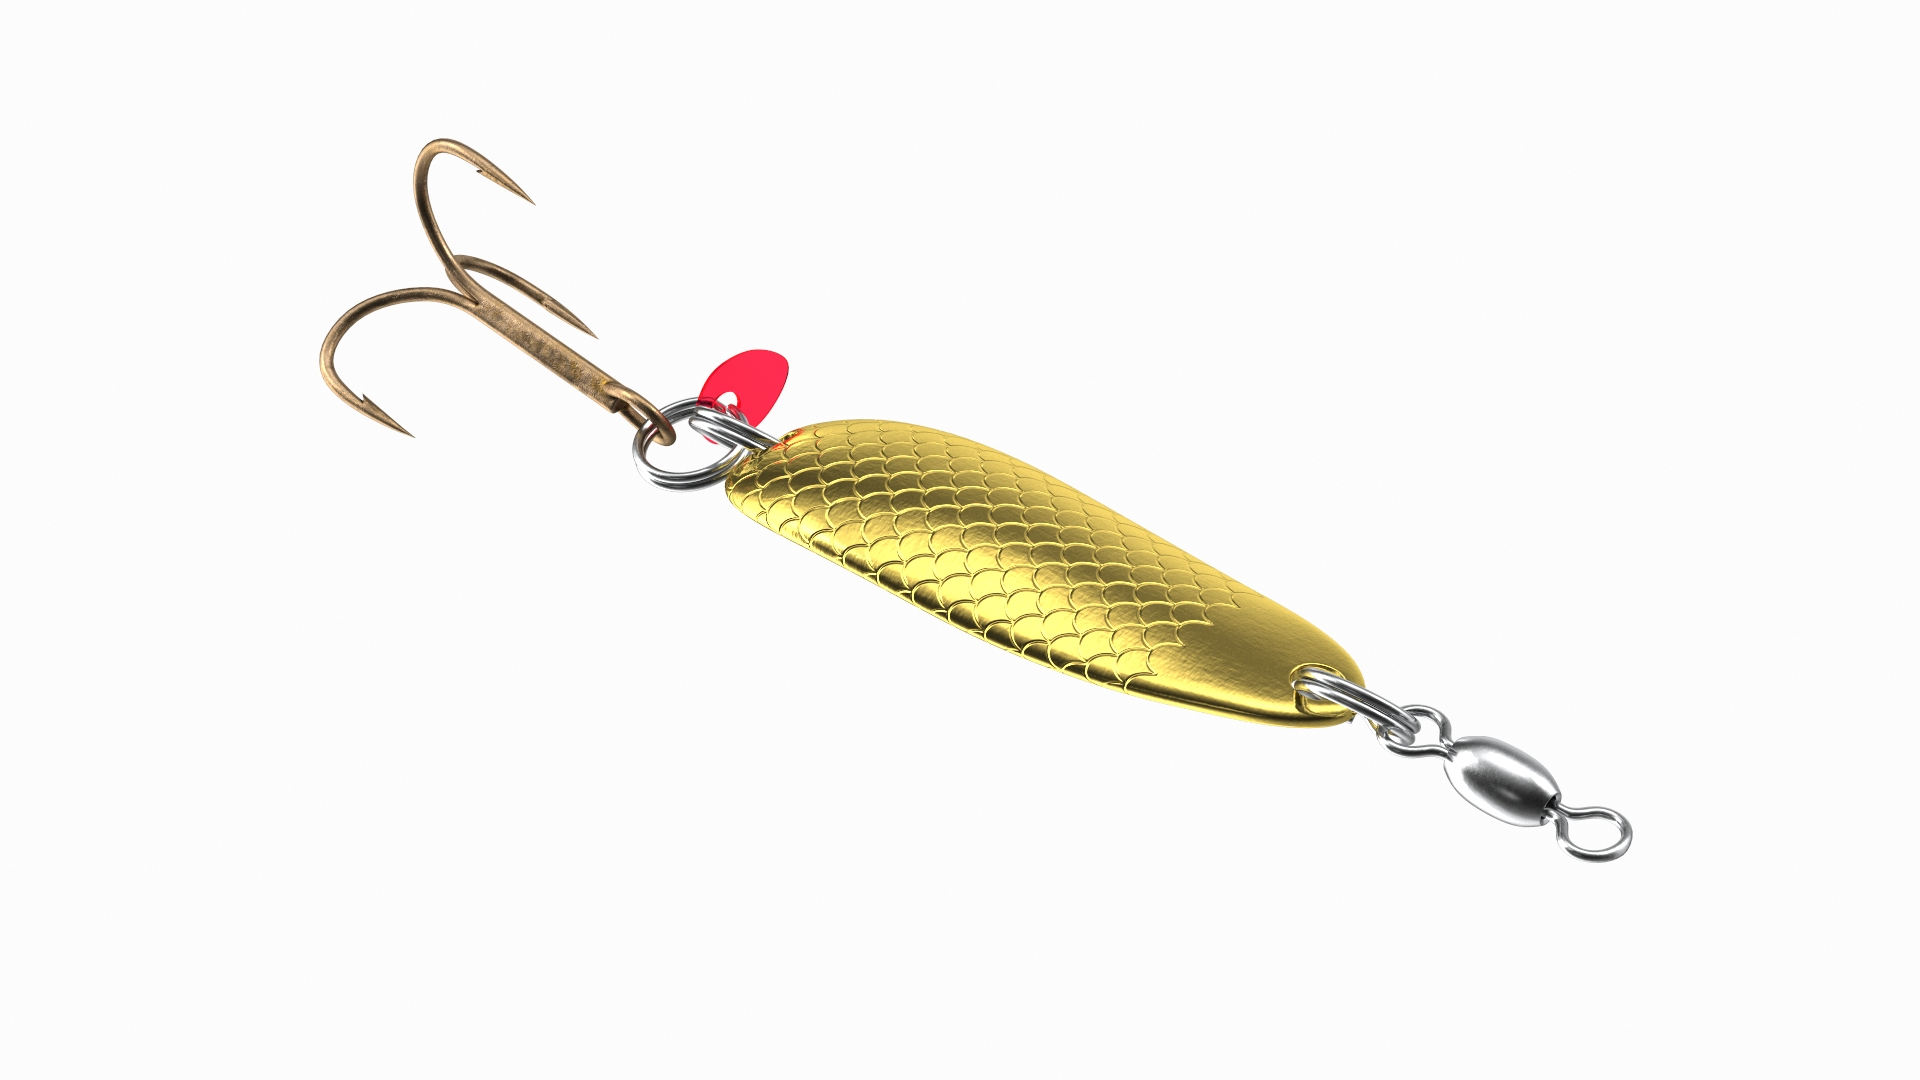 3D Trolling Spoons Lure Collection Model - TurboSquid 1834164